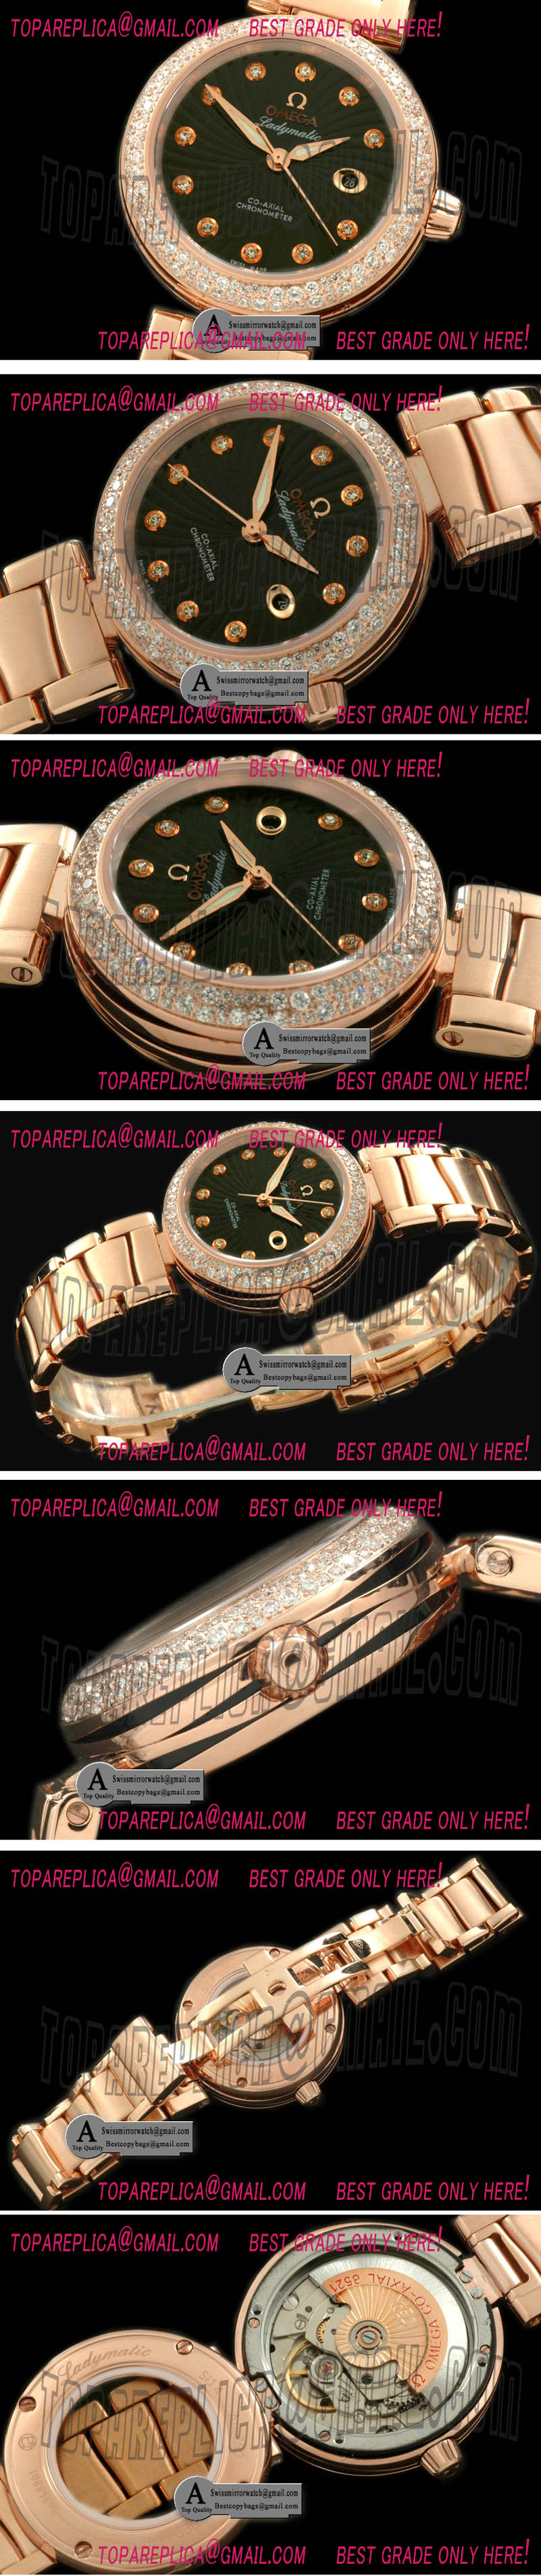 Omega Deville Ladymatic Mid 425.65.34.20.51.001 Rose Gold/Rose Gold Black A-2836 Replica Watches